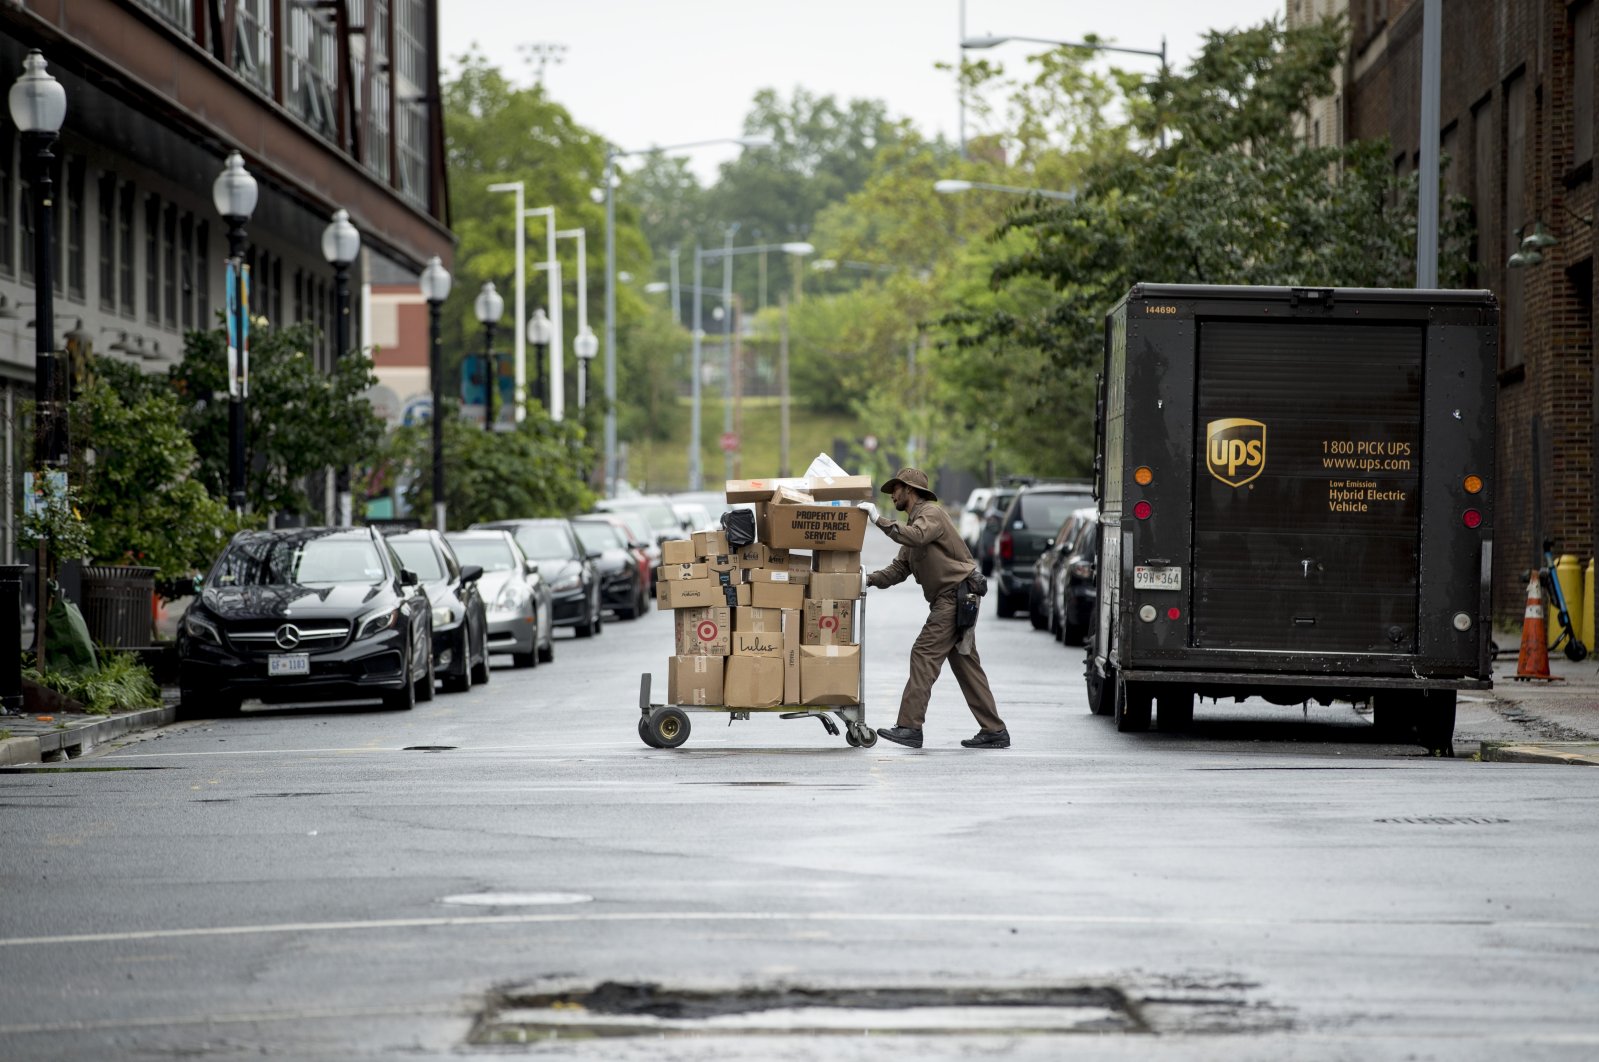 A delivery man pushes a cart full of packages to deliver to an apartment building on an almost empty street in the Shaw neighborhood of Washington, D.C., U.S., May 22, 2020. (AP Photo)